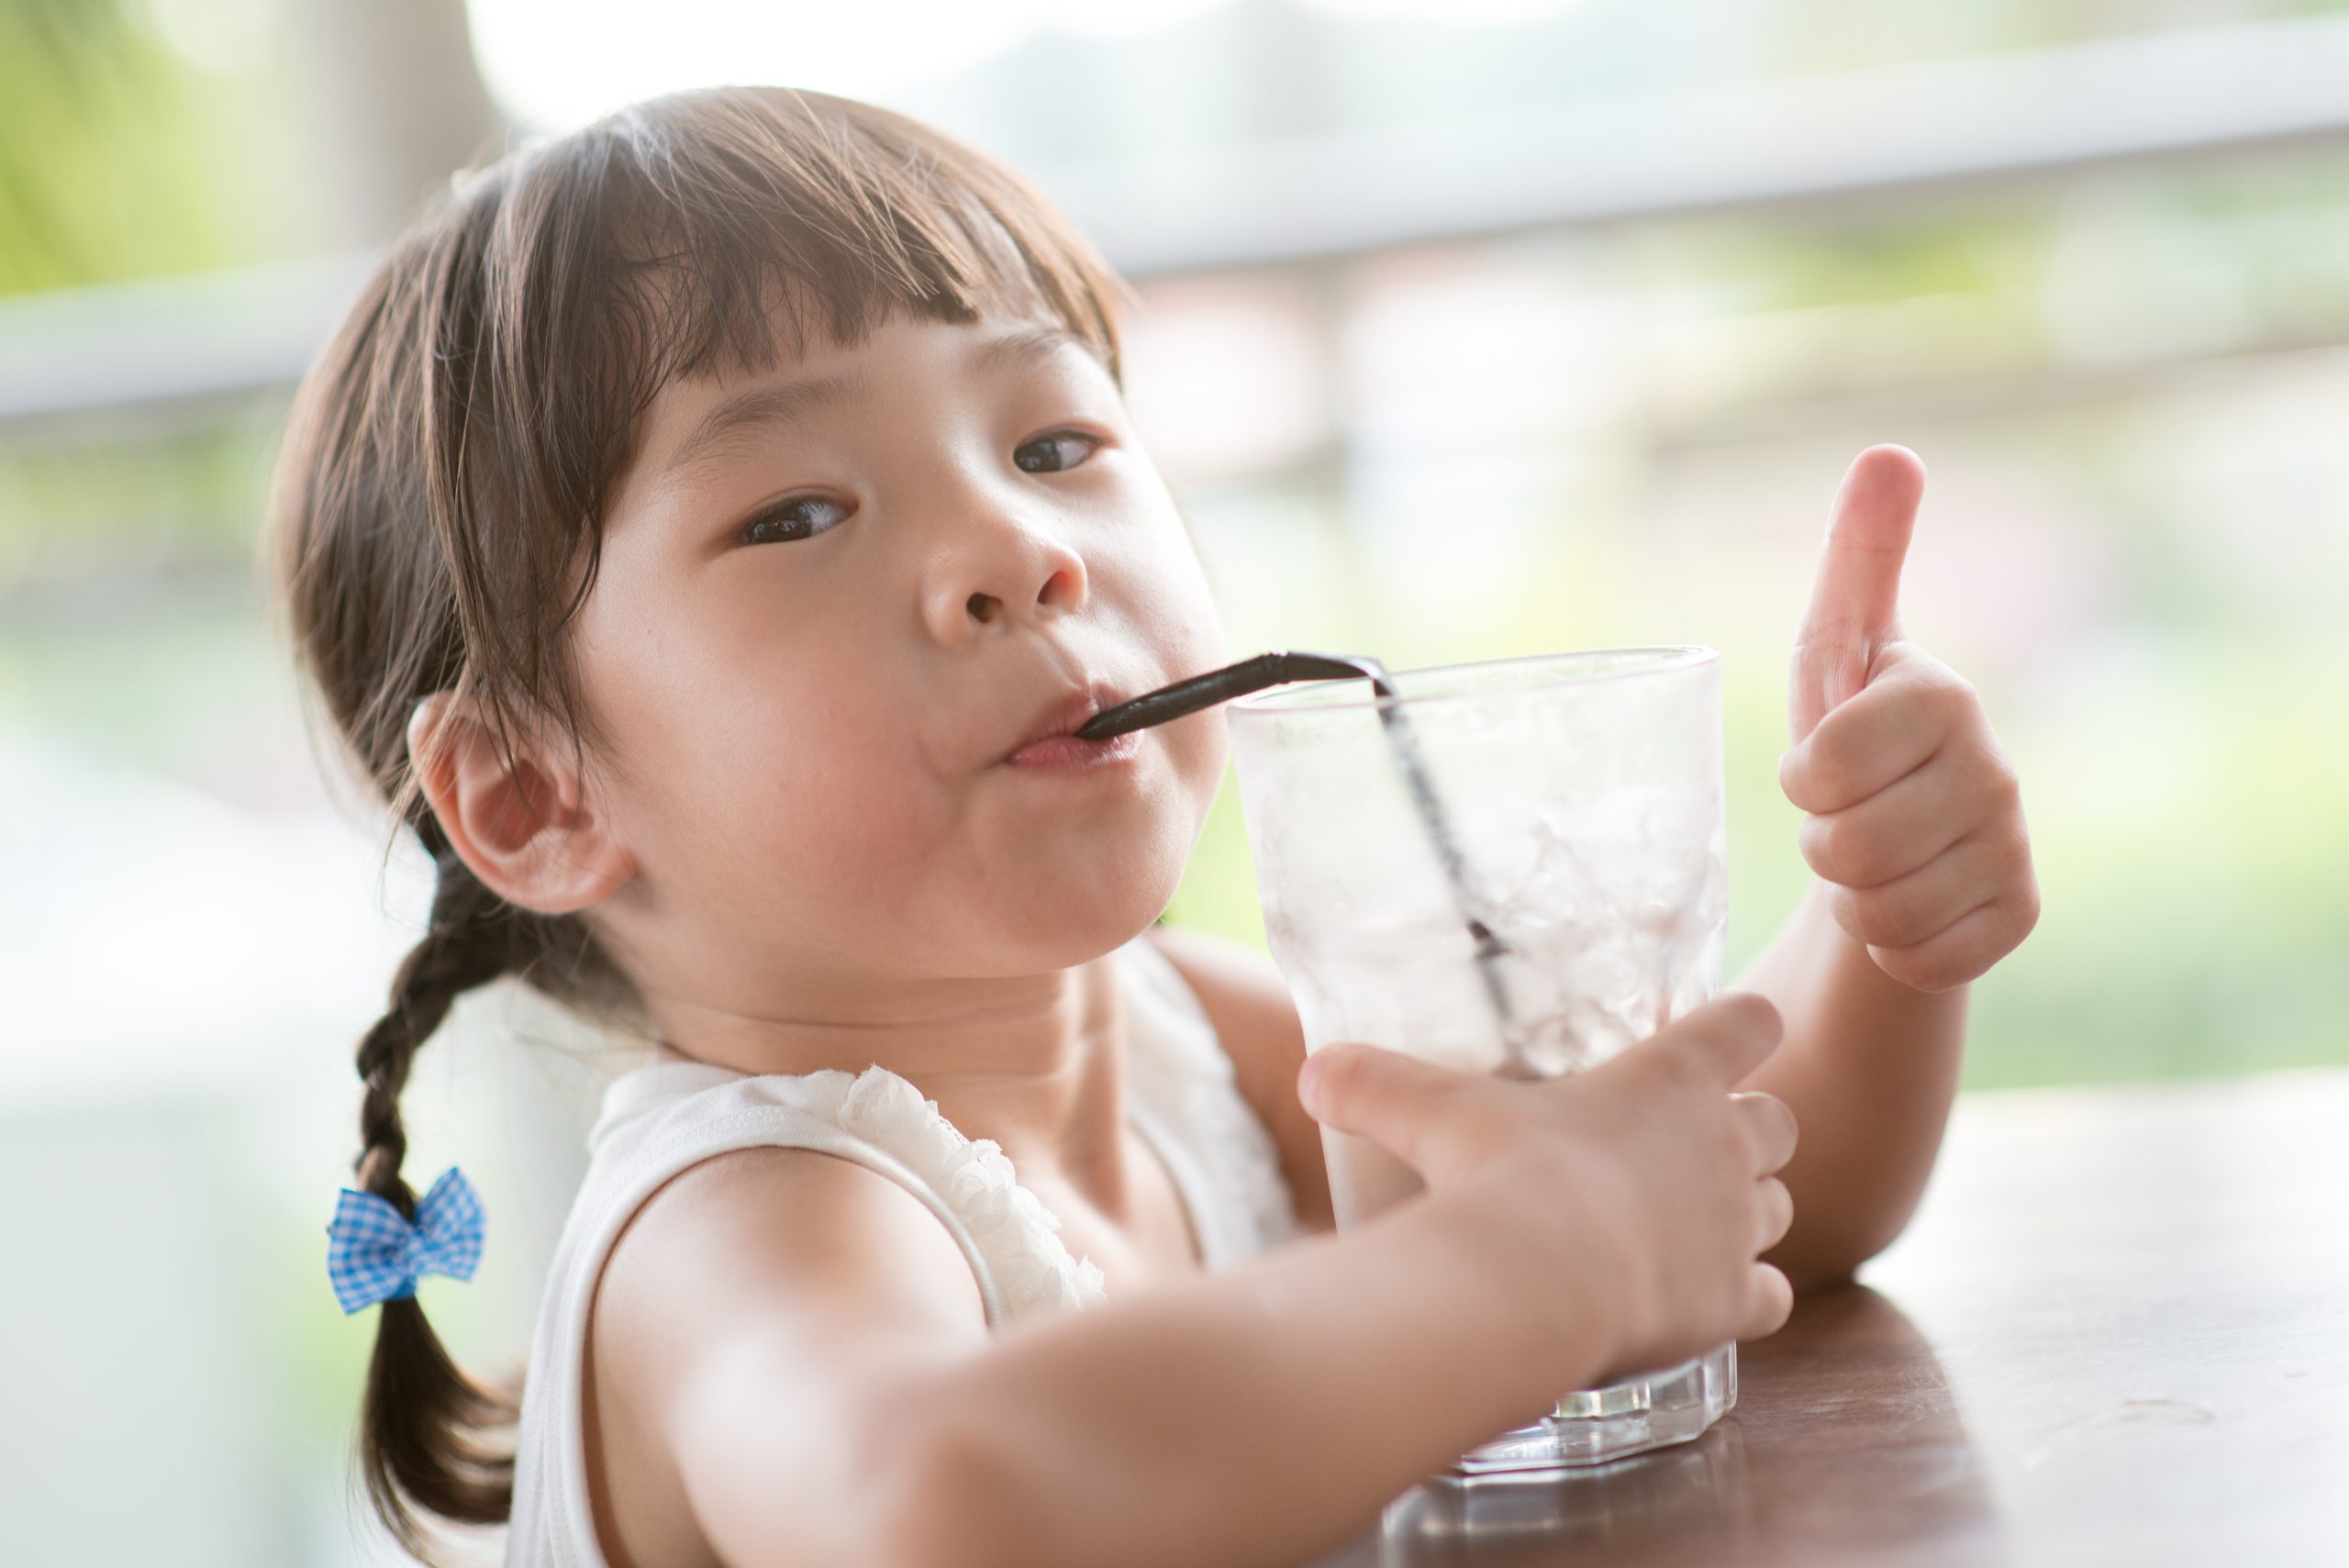 Beat the Summer Heat: Expert Tips to Stay Hydrated and Prevent Dehydration